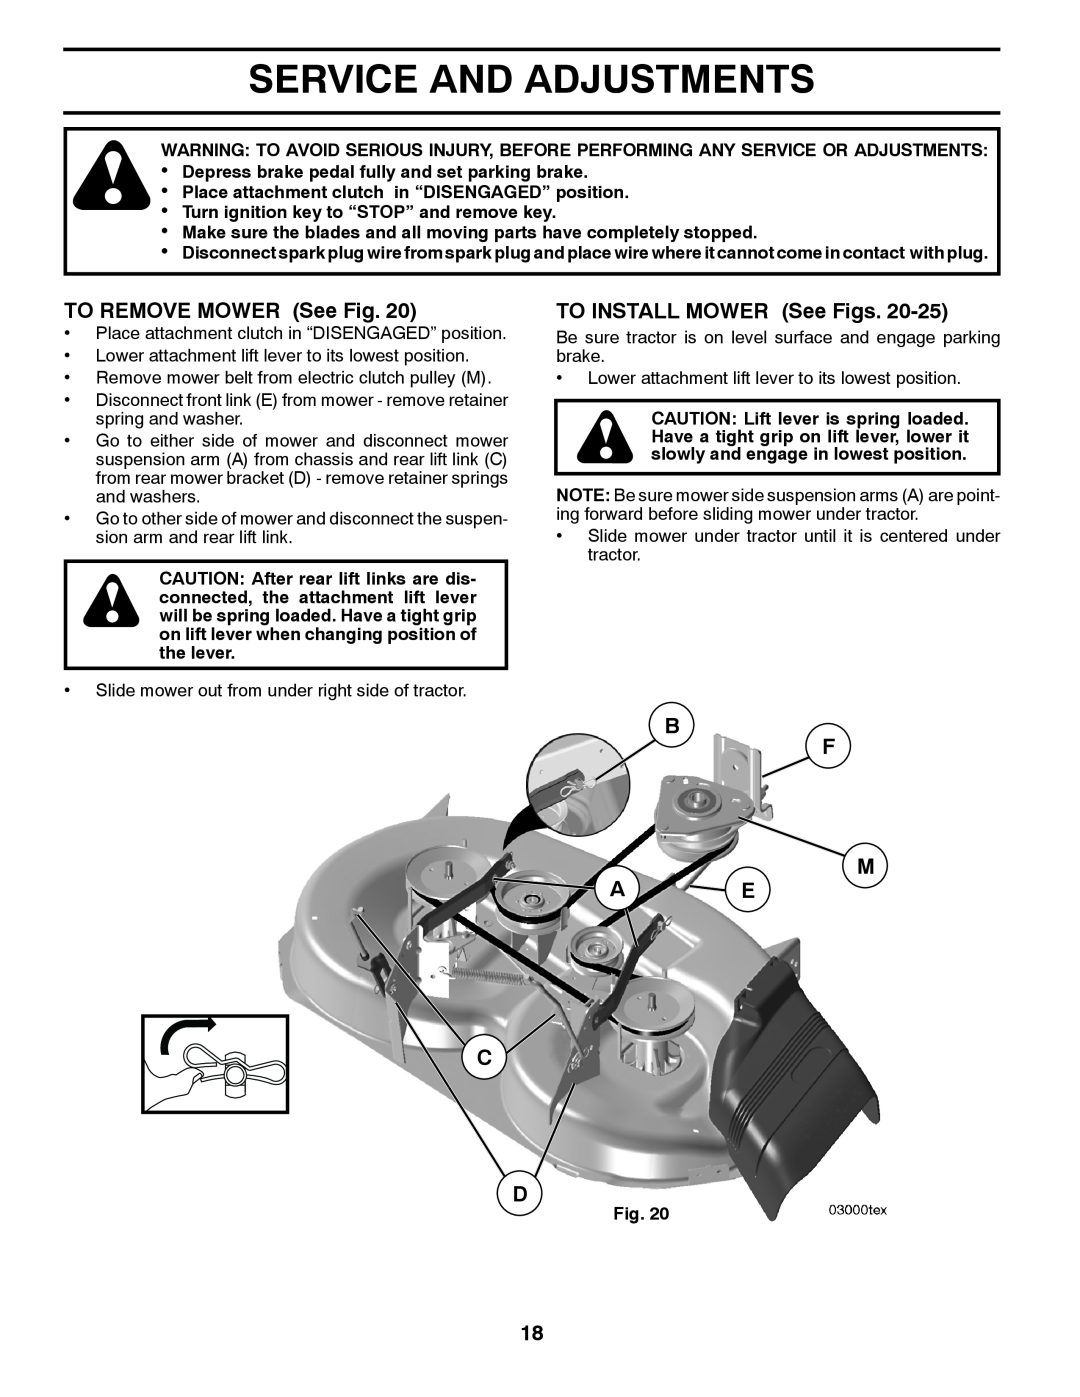 Husqvarna YTH22V46XLS owner manual Service And Adjustments, TO REMOVE MOWER See Fig, TO INSTALL MOWER See Figs, M A E C D 